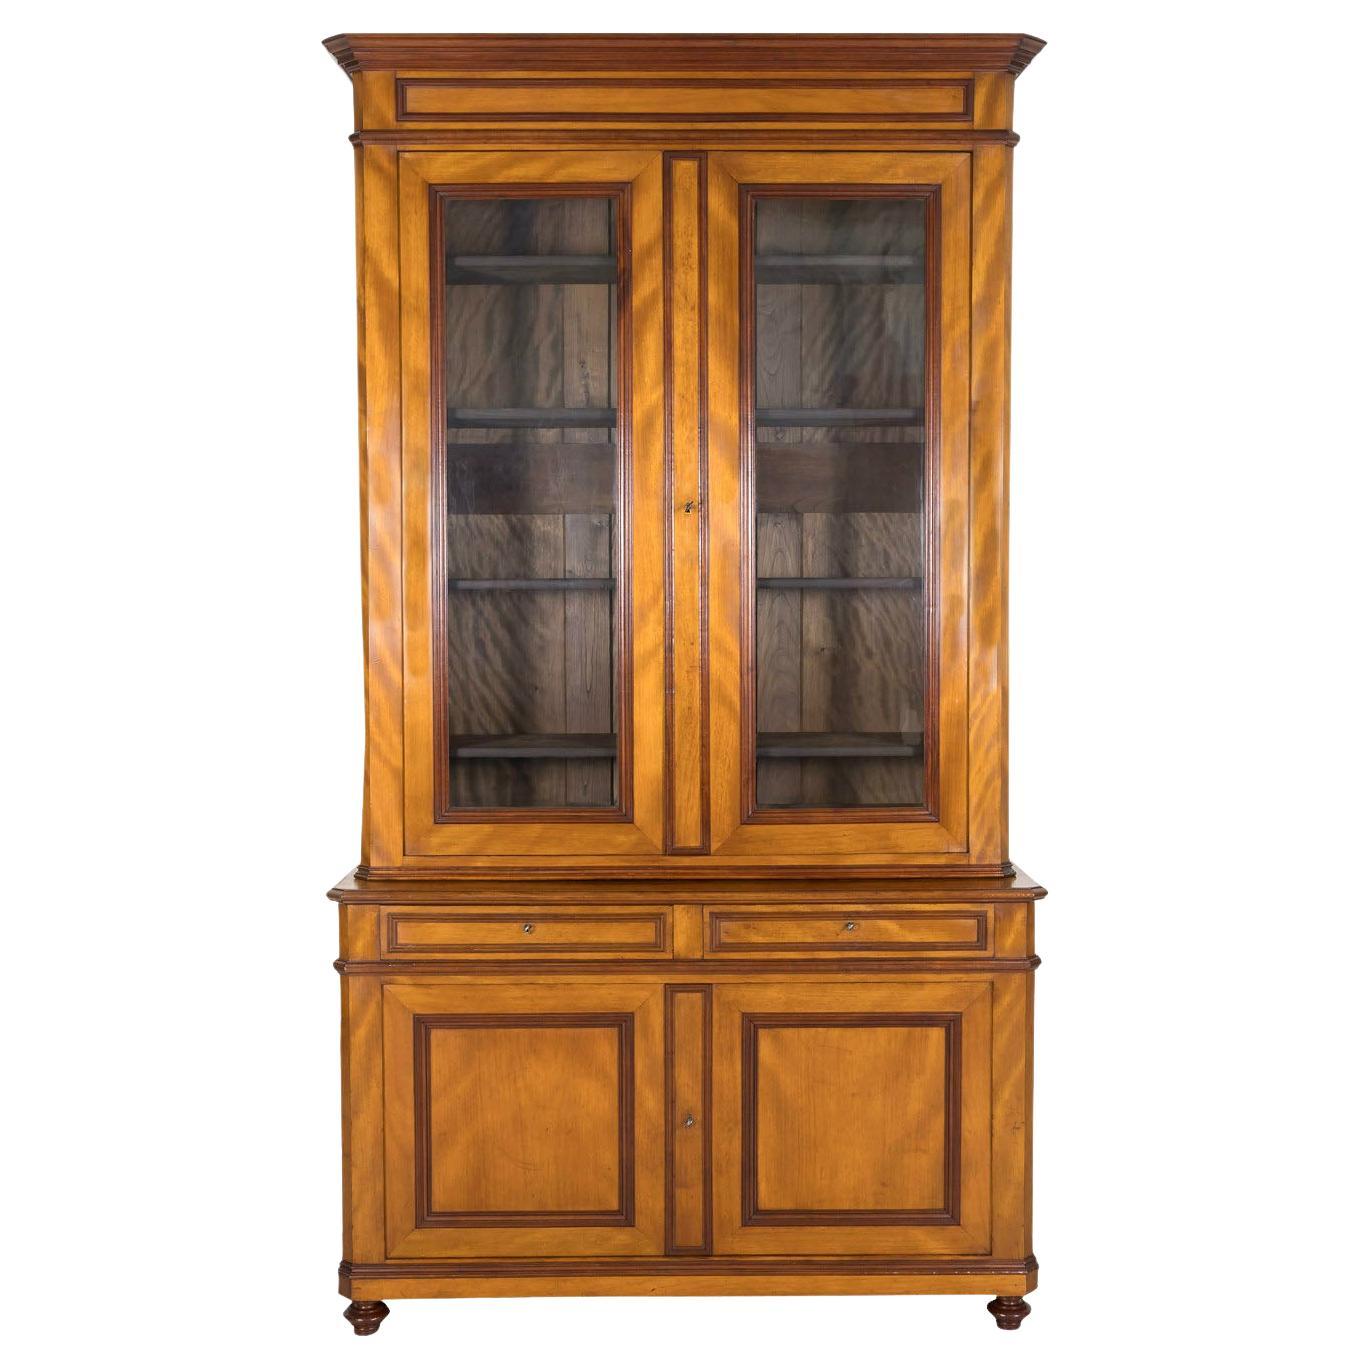 19th Century French Louis Philippe Style Flame Mahogany Bibliotheque or Bookcase